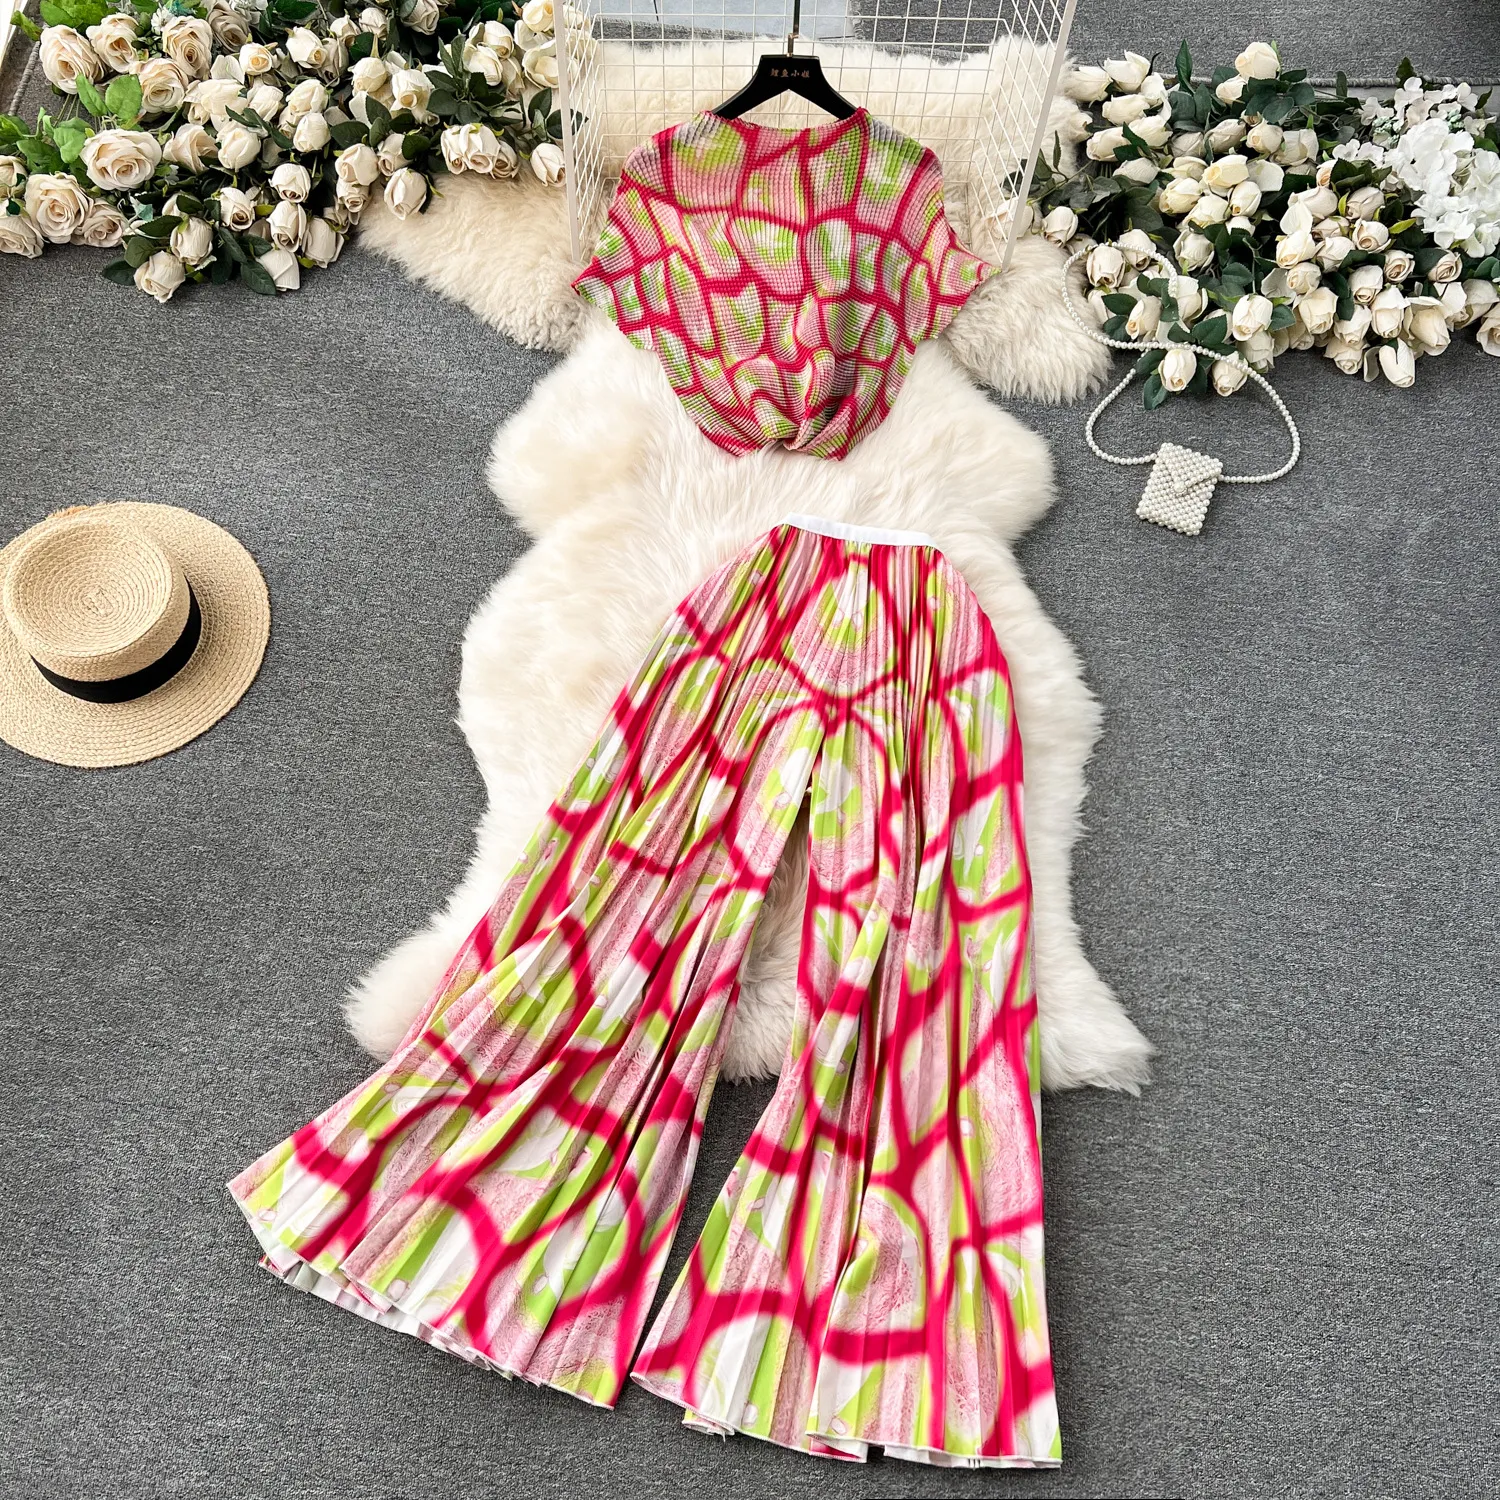 Celebrity style high-end suit for women's heavy industry with pleated short sleeved T-shirt design, printed high waisted wide leg pants two-piece set